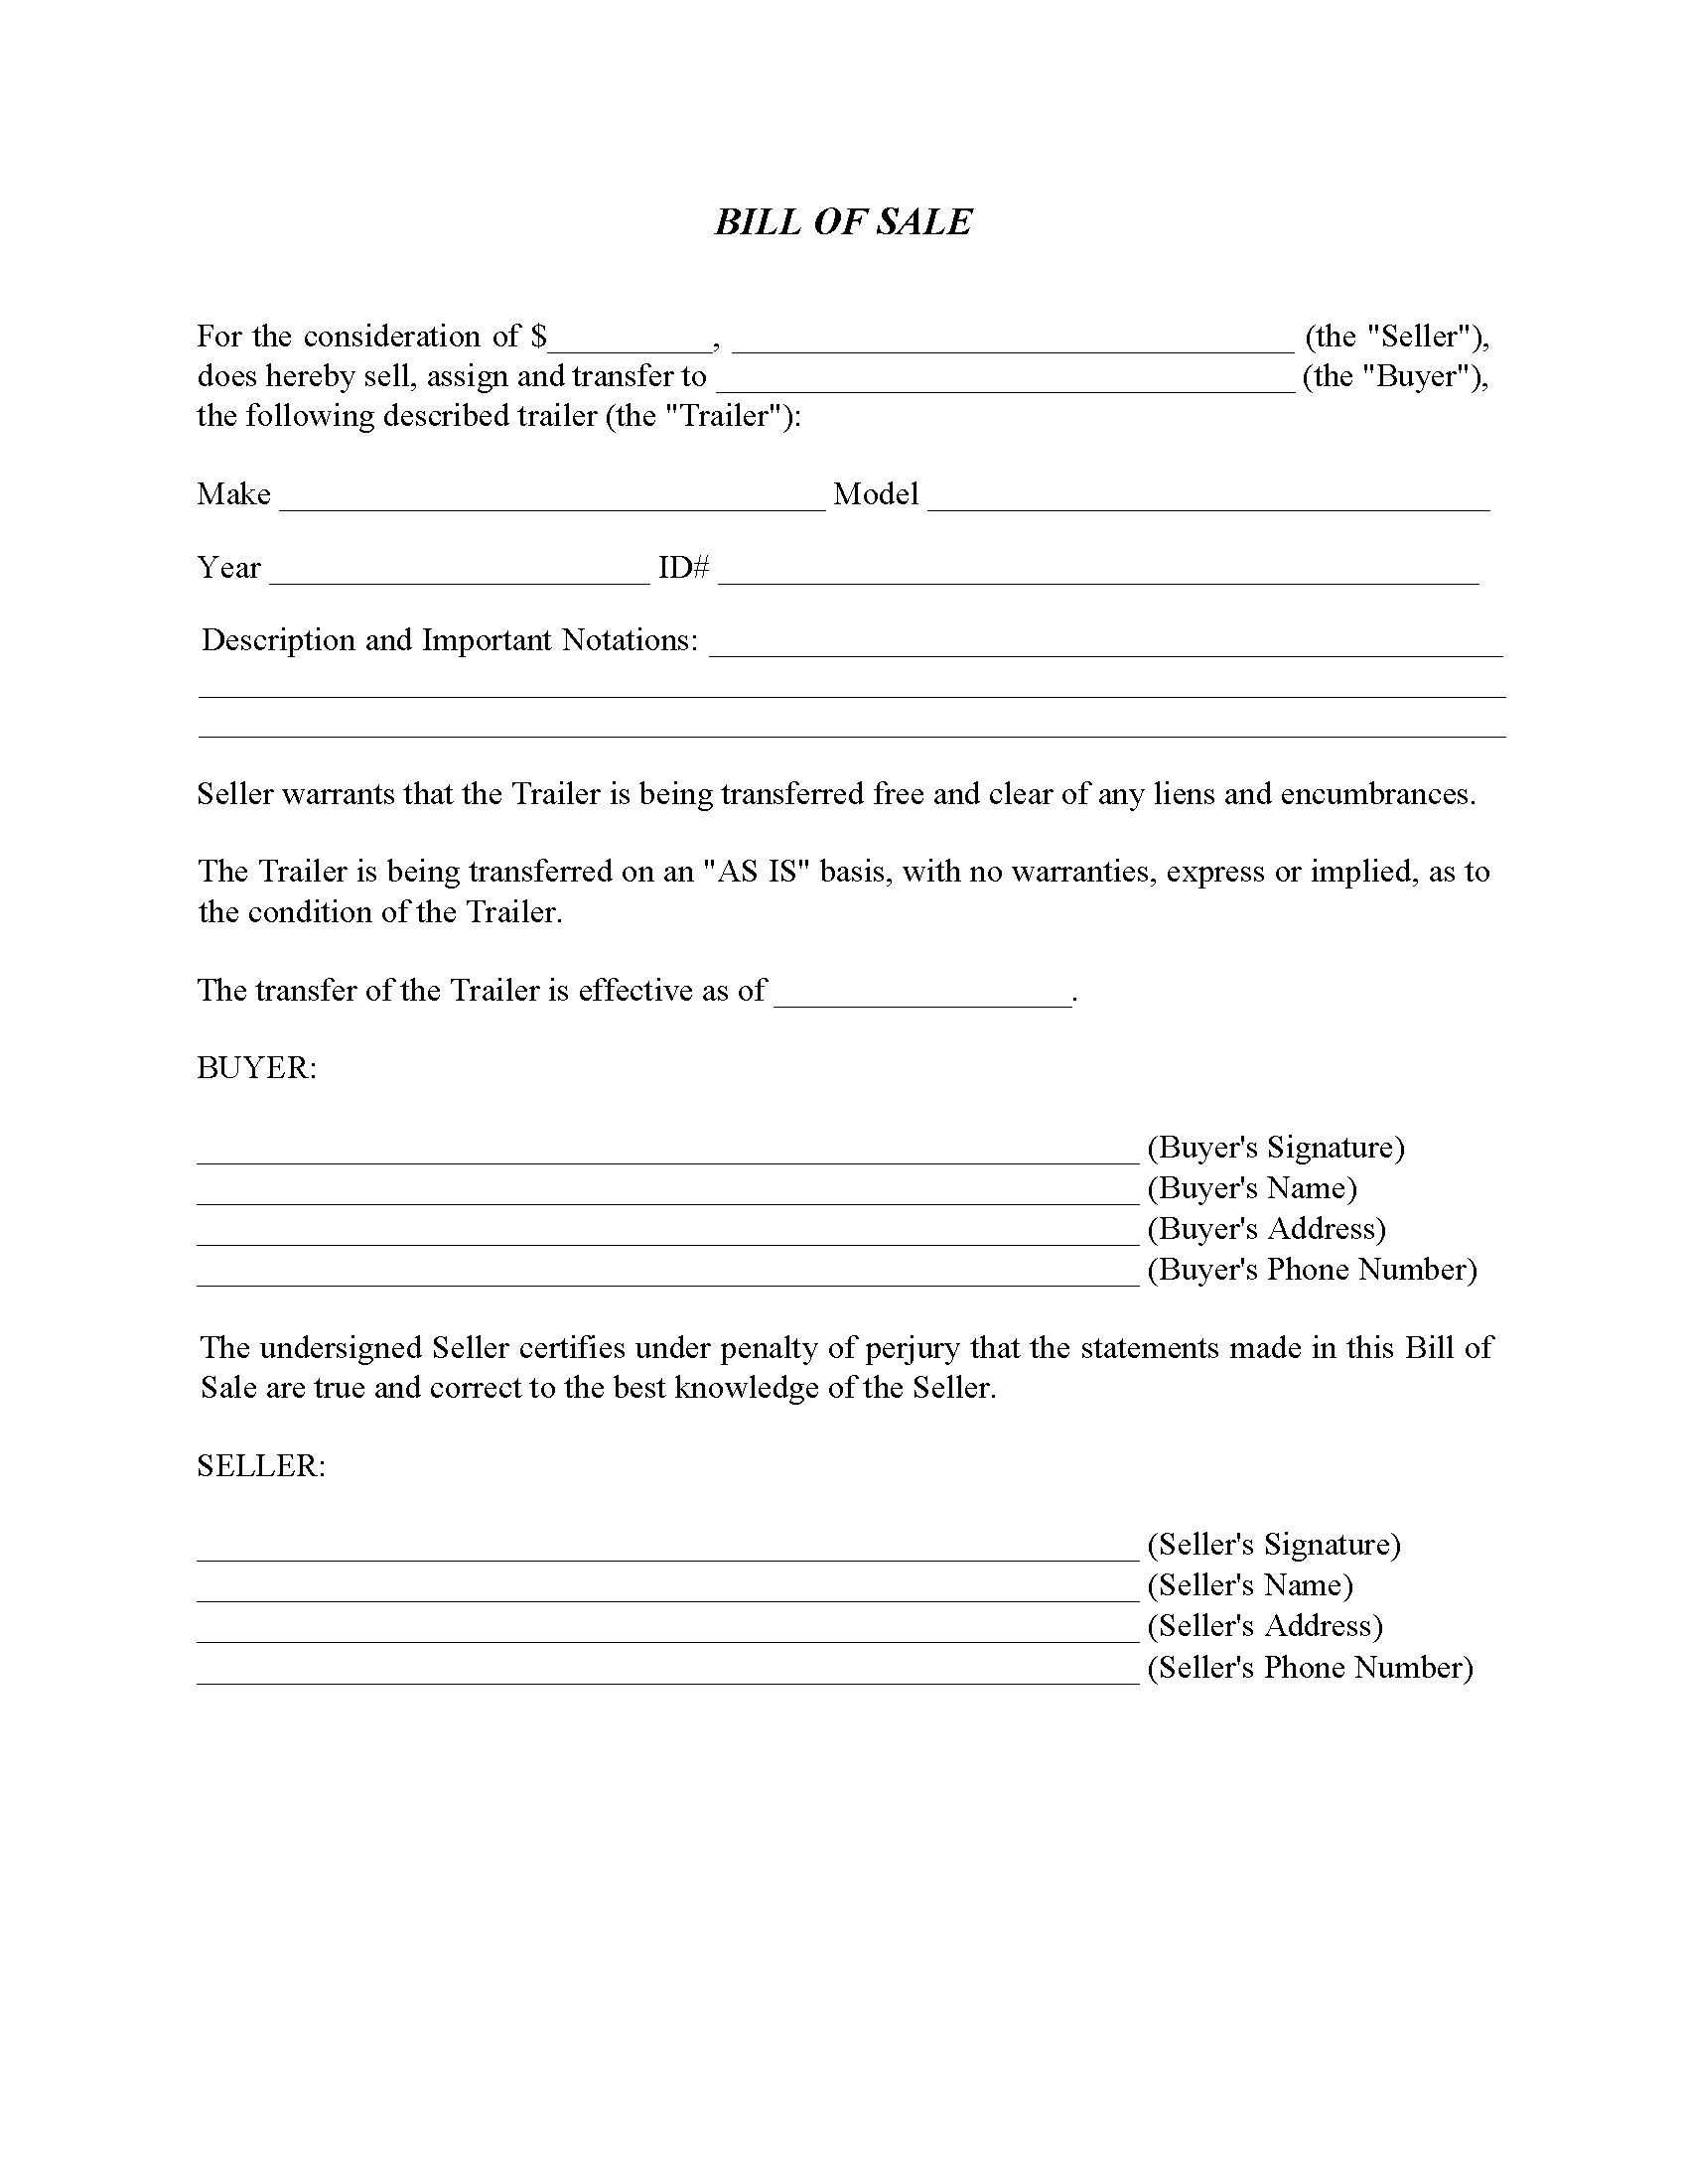 Tennessee Trailer Bill of Sale Form - PDF